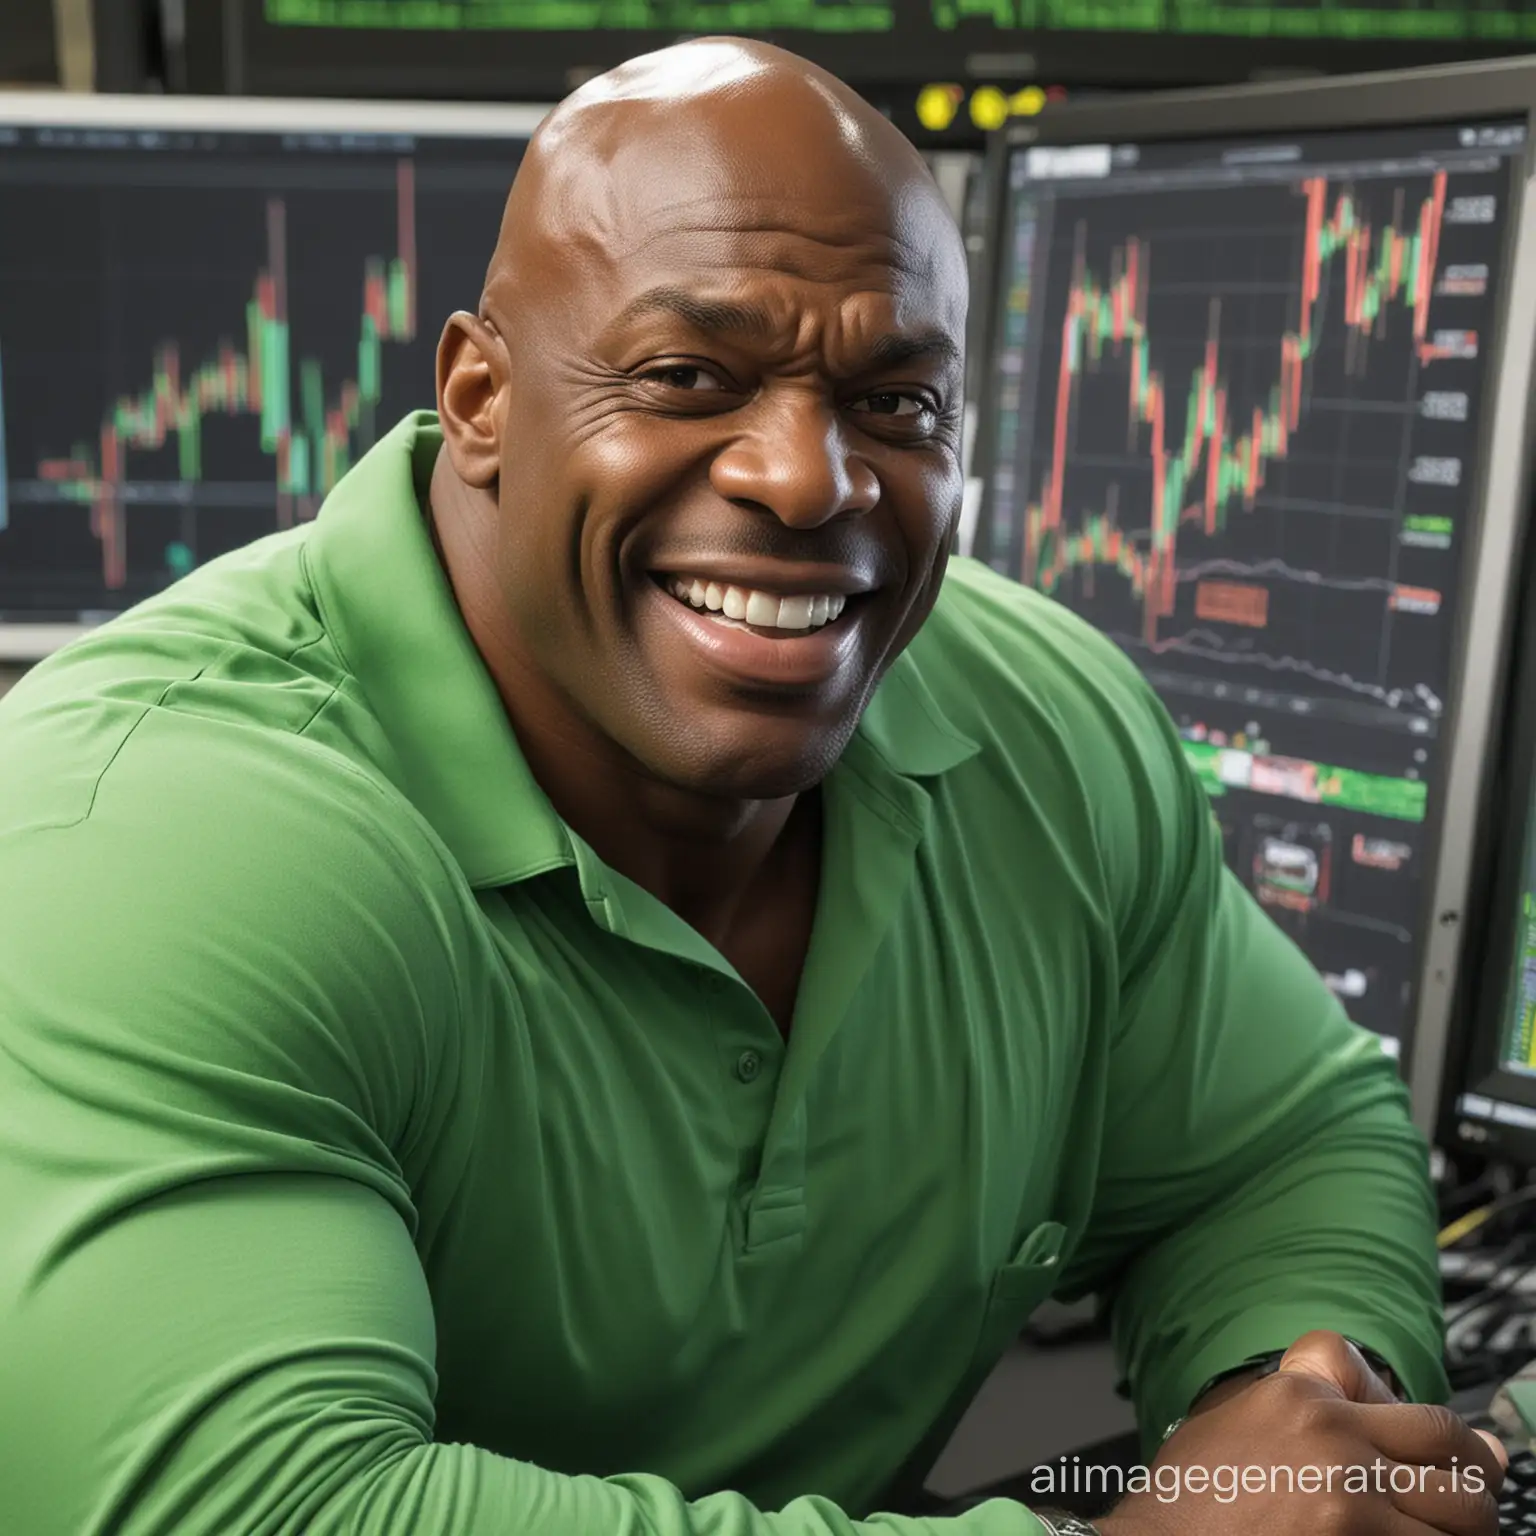 Ronnie-Coleman-Trading-at-Computer-Green-Positive-Chart-and-Extreme-Happiness